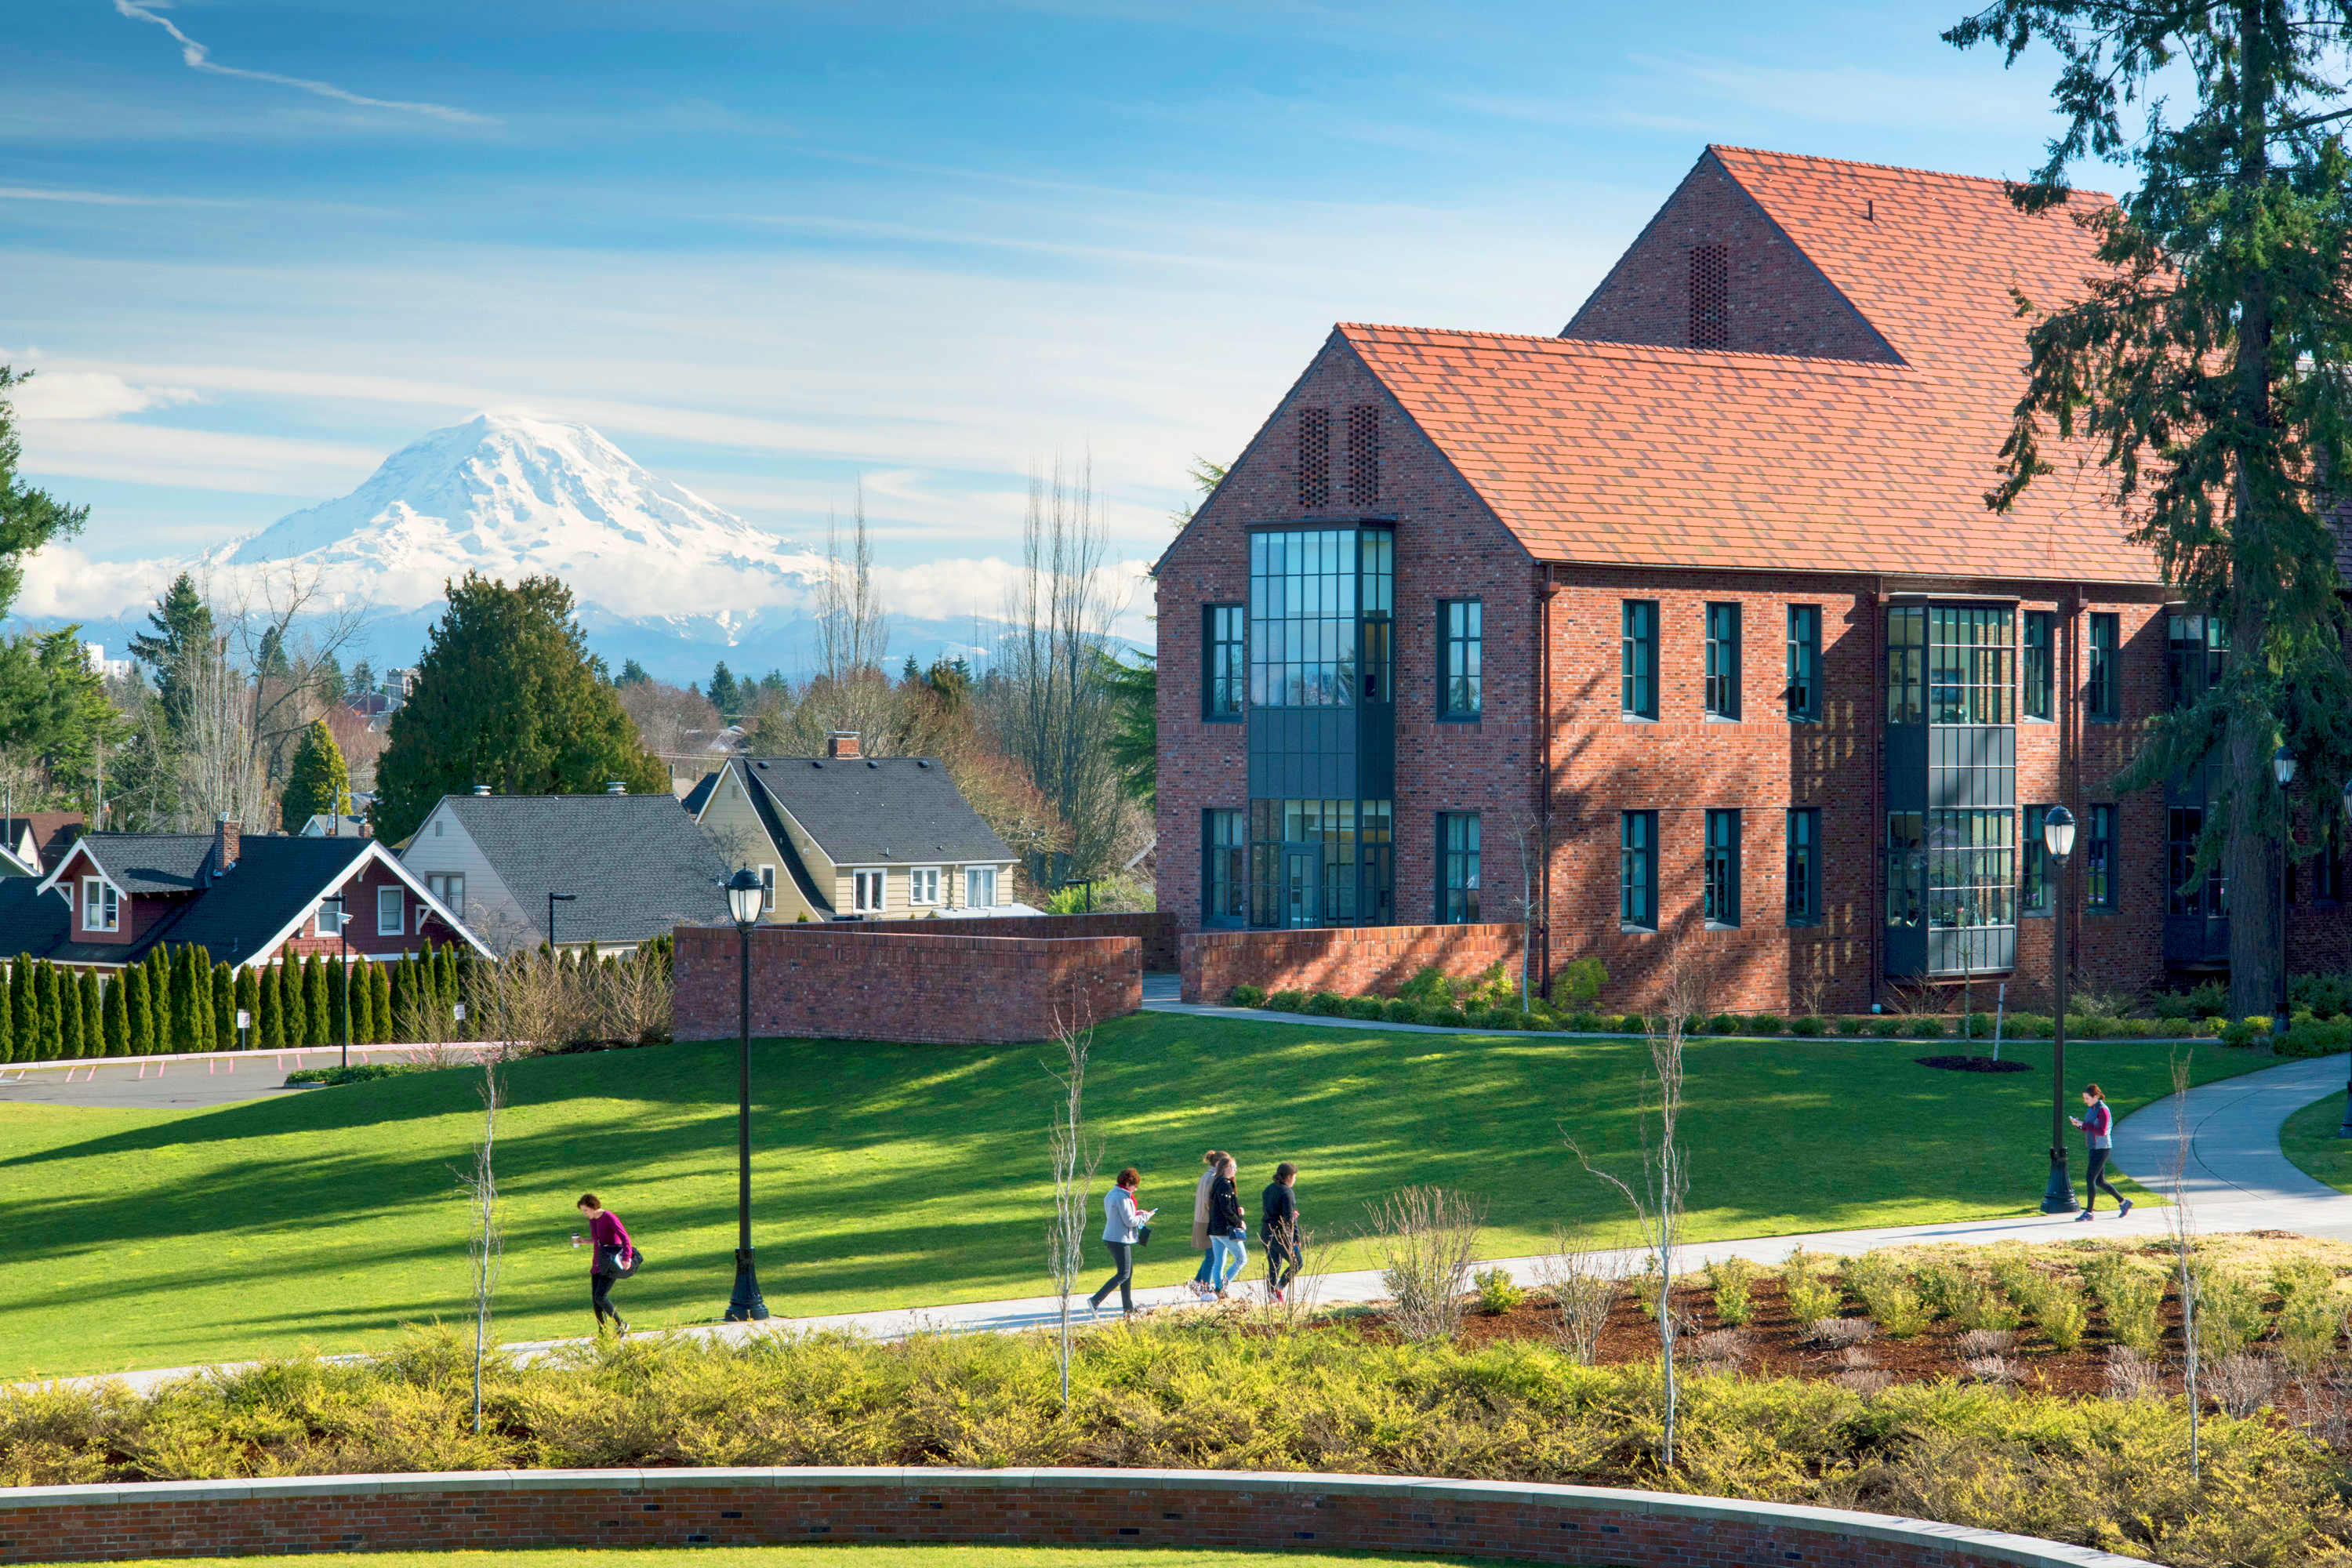 Students walking in front of Weyerhauser Hall with Mt. Rainier in the background